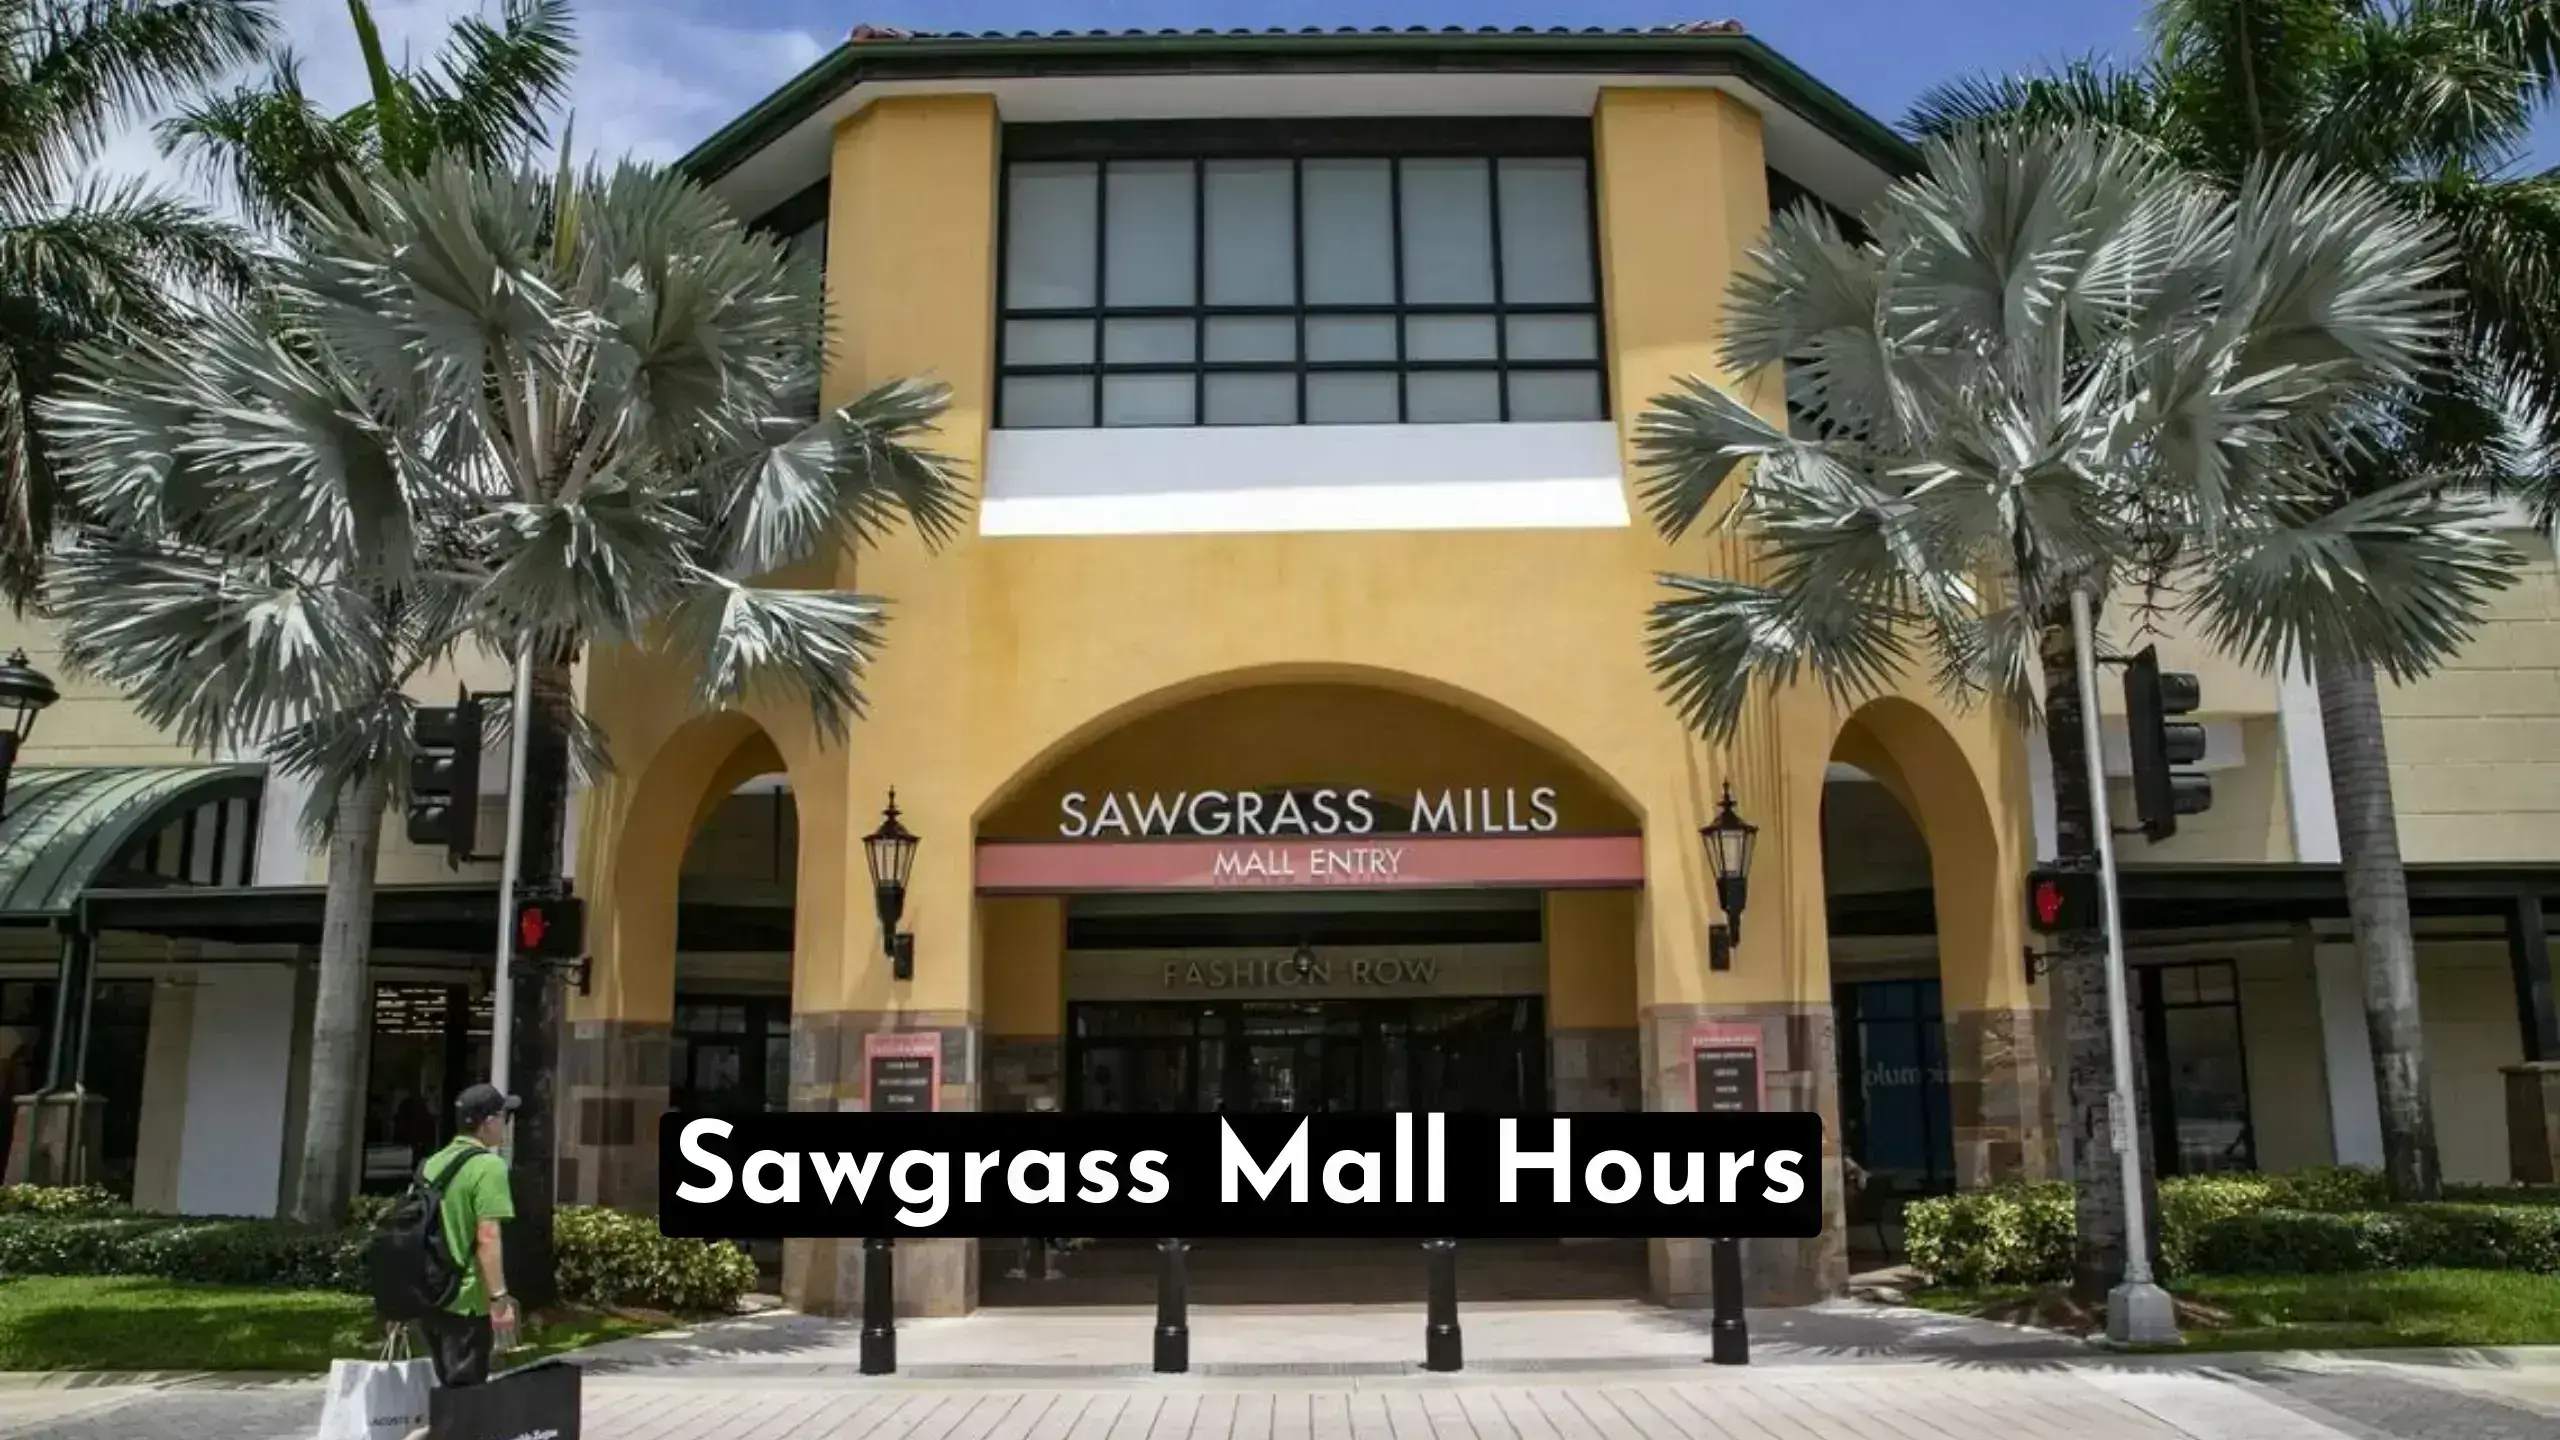 Sawgrass Mall Hours: Don't miss out on the huge sales at Sawgrass Mills this weekend! Up to 70% off at your favorite brands.